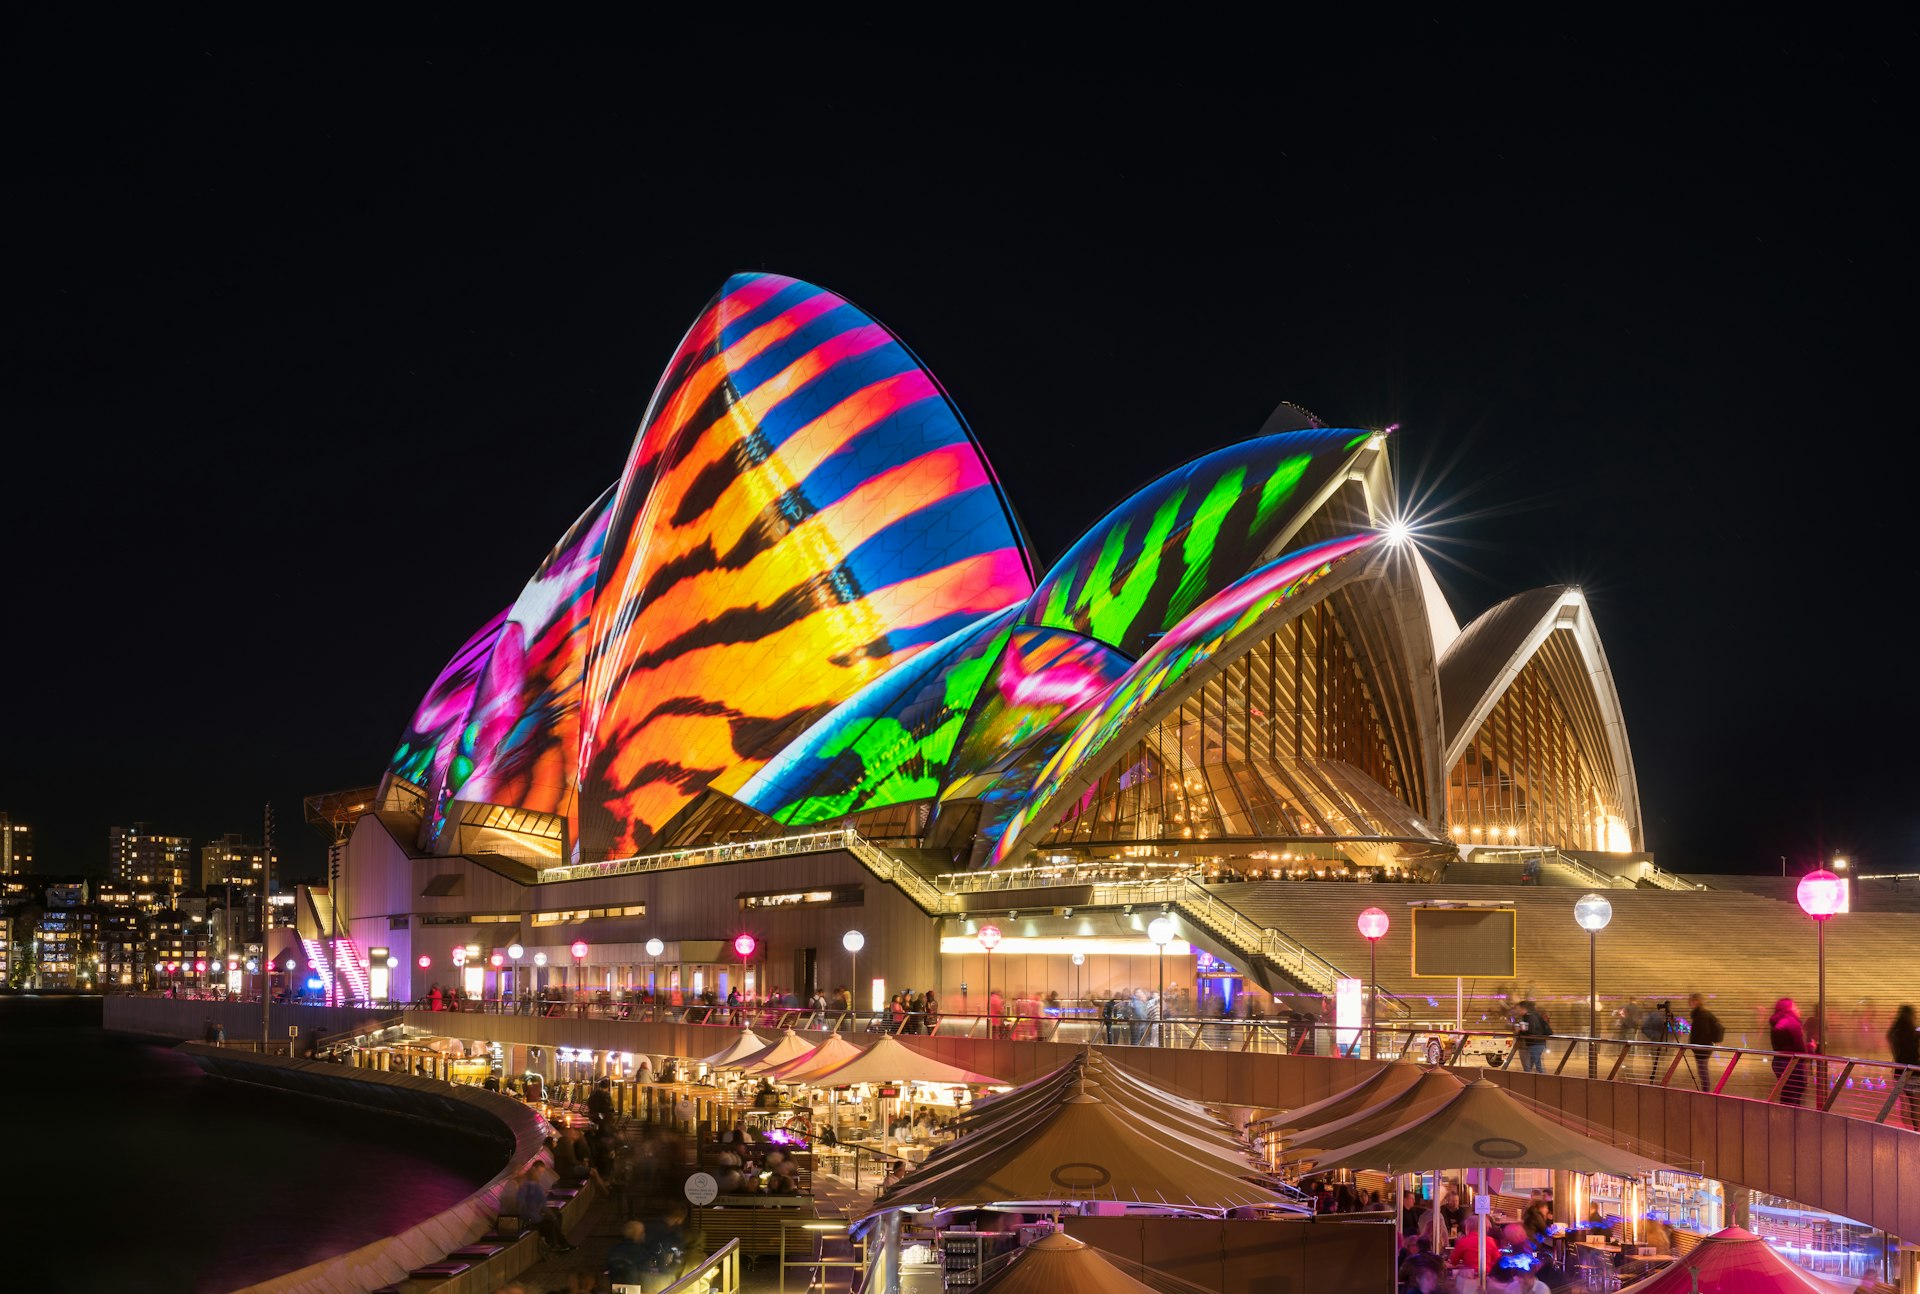 The iconic Opera House in Sydney is used as a projector screen, covered with colorful lights and images